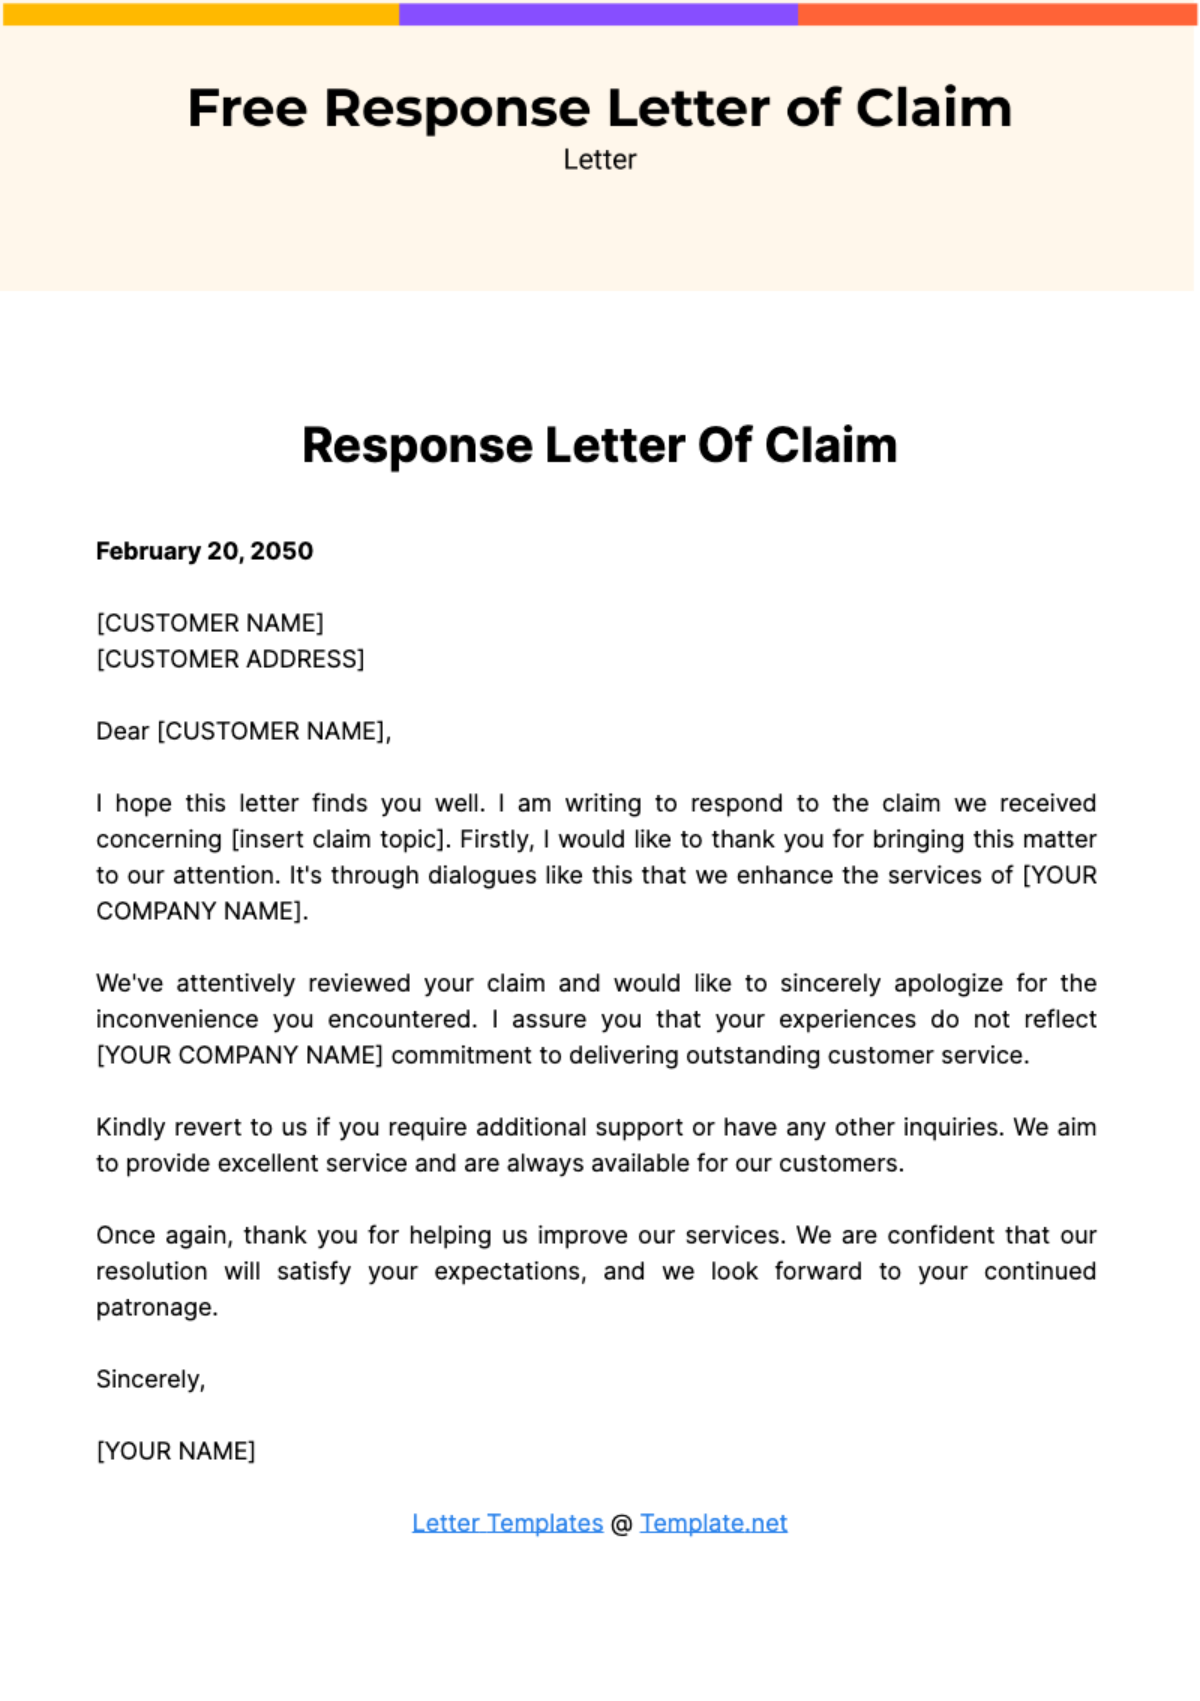 Response Letter of Claim Template